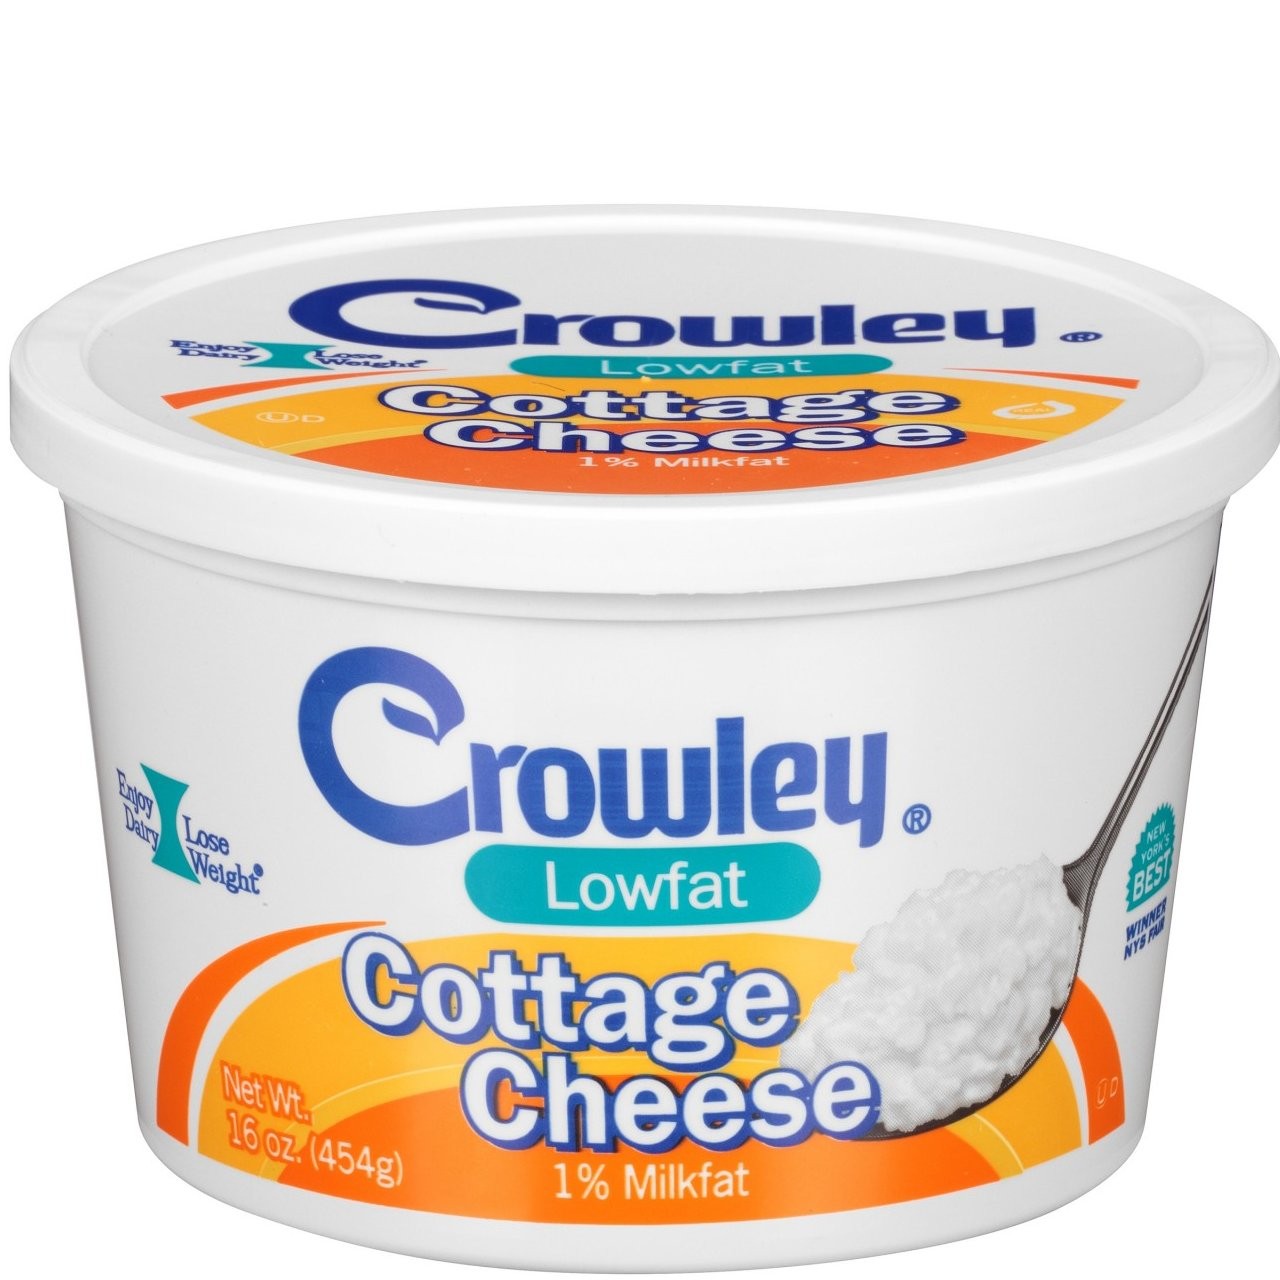 CROWLEY COTTAGE CHEESE LF 16oz